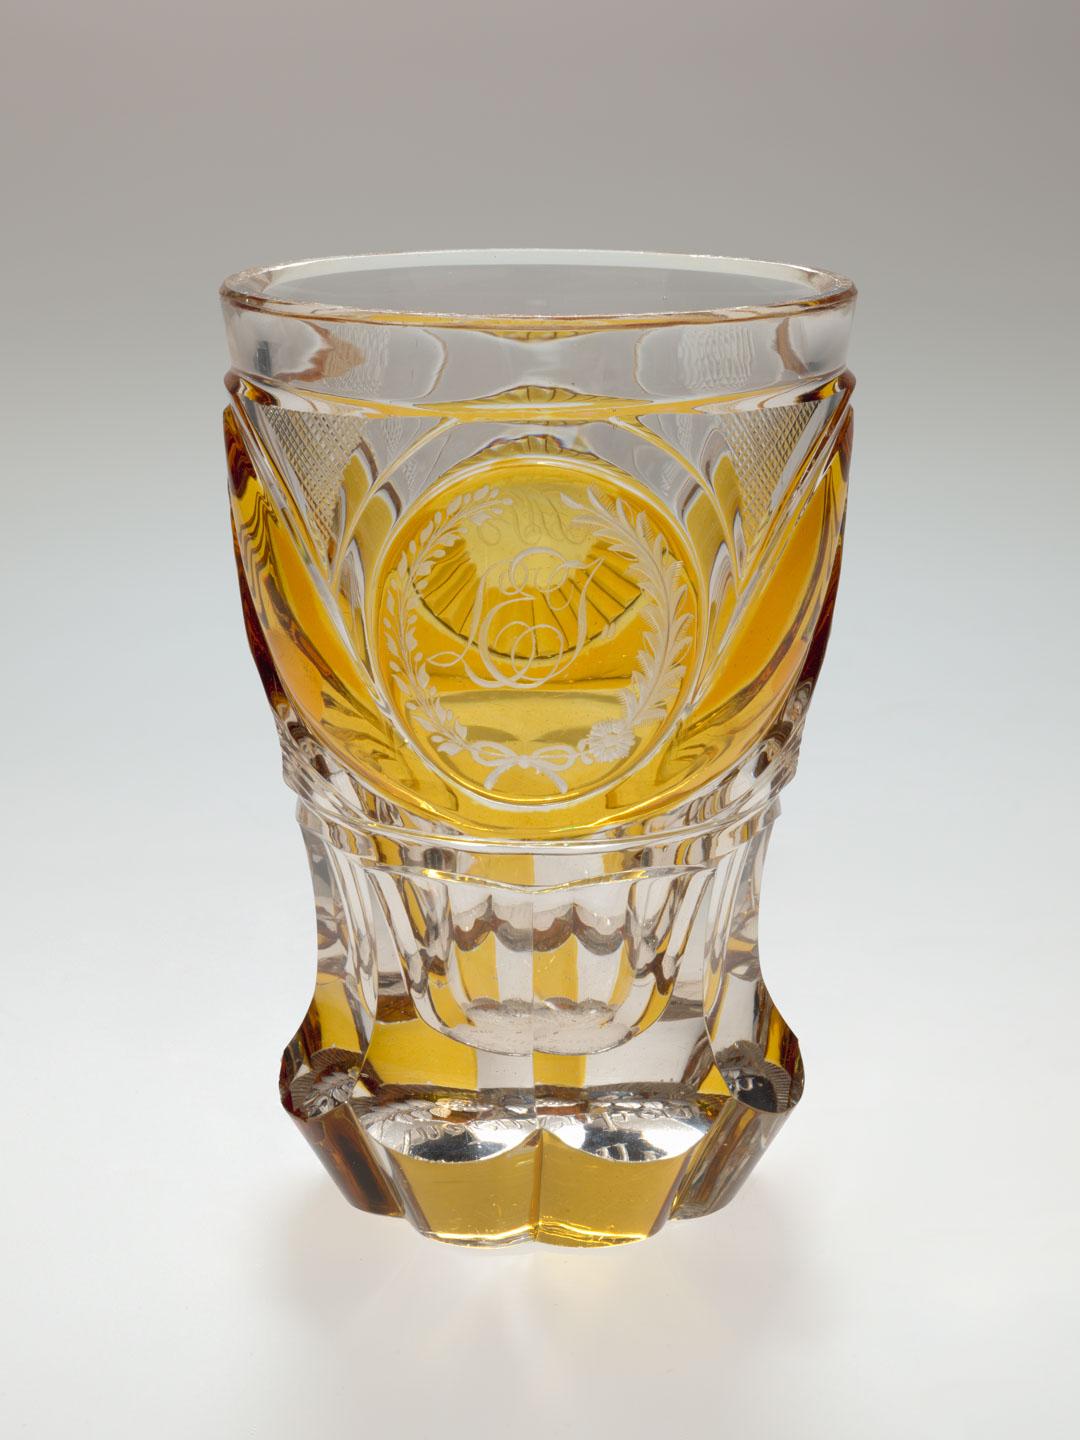 Artwork Beaker this artwork made of Clear glass stained yellow and wheelcut with facets and ridged circular motifs, created in 1840-01-01